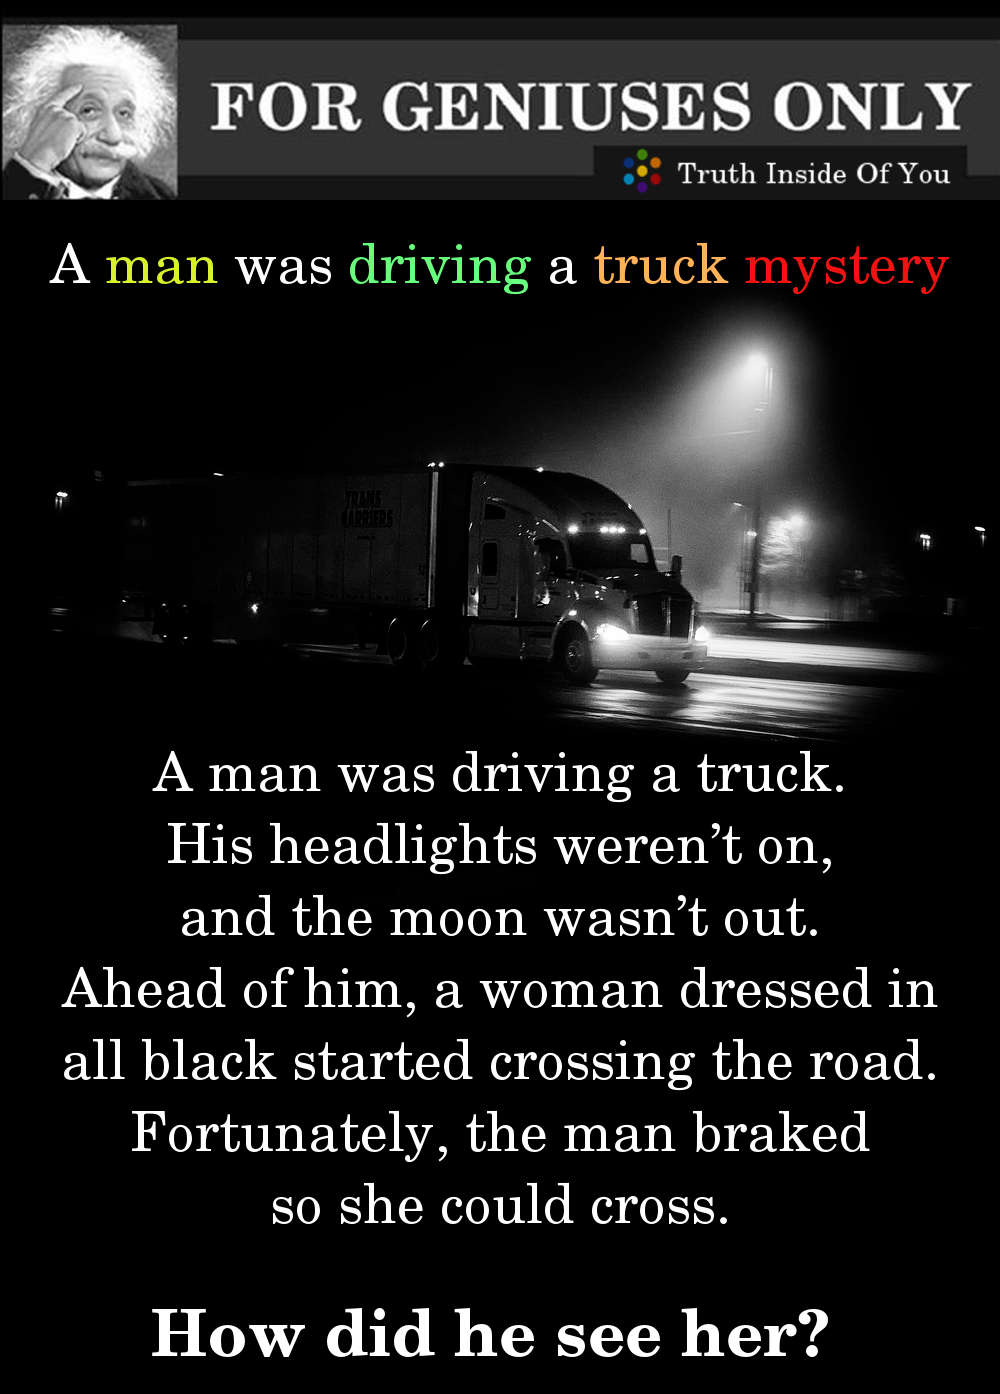 A man was driving a truck